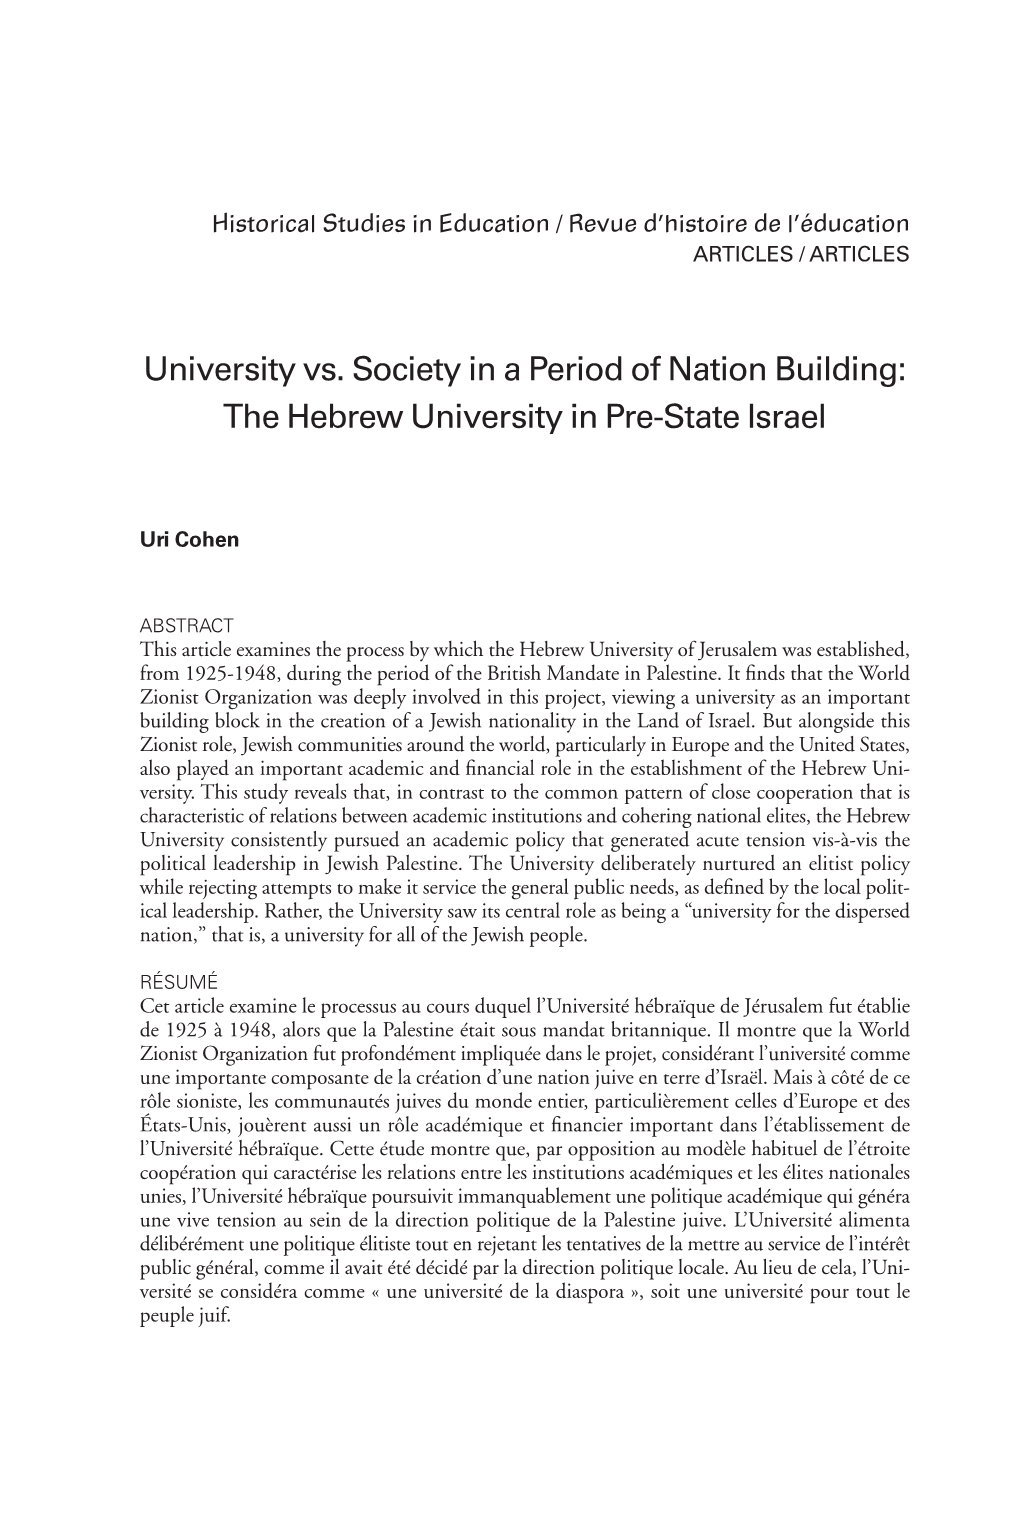 University Vs. Society in a Period of Nation Building: the Hebrew University in Pre-State Israel